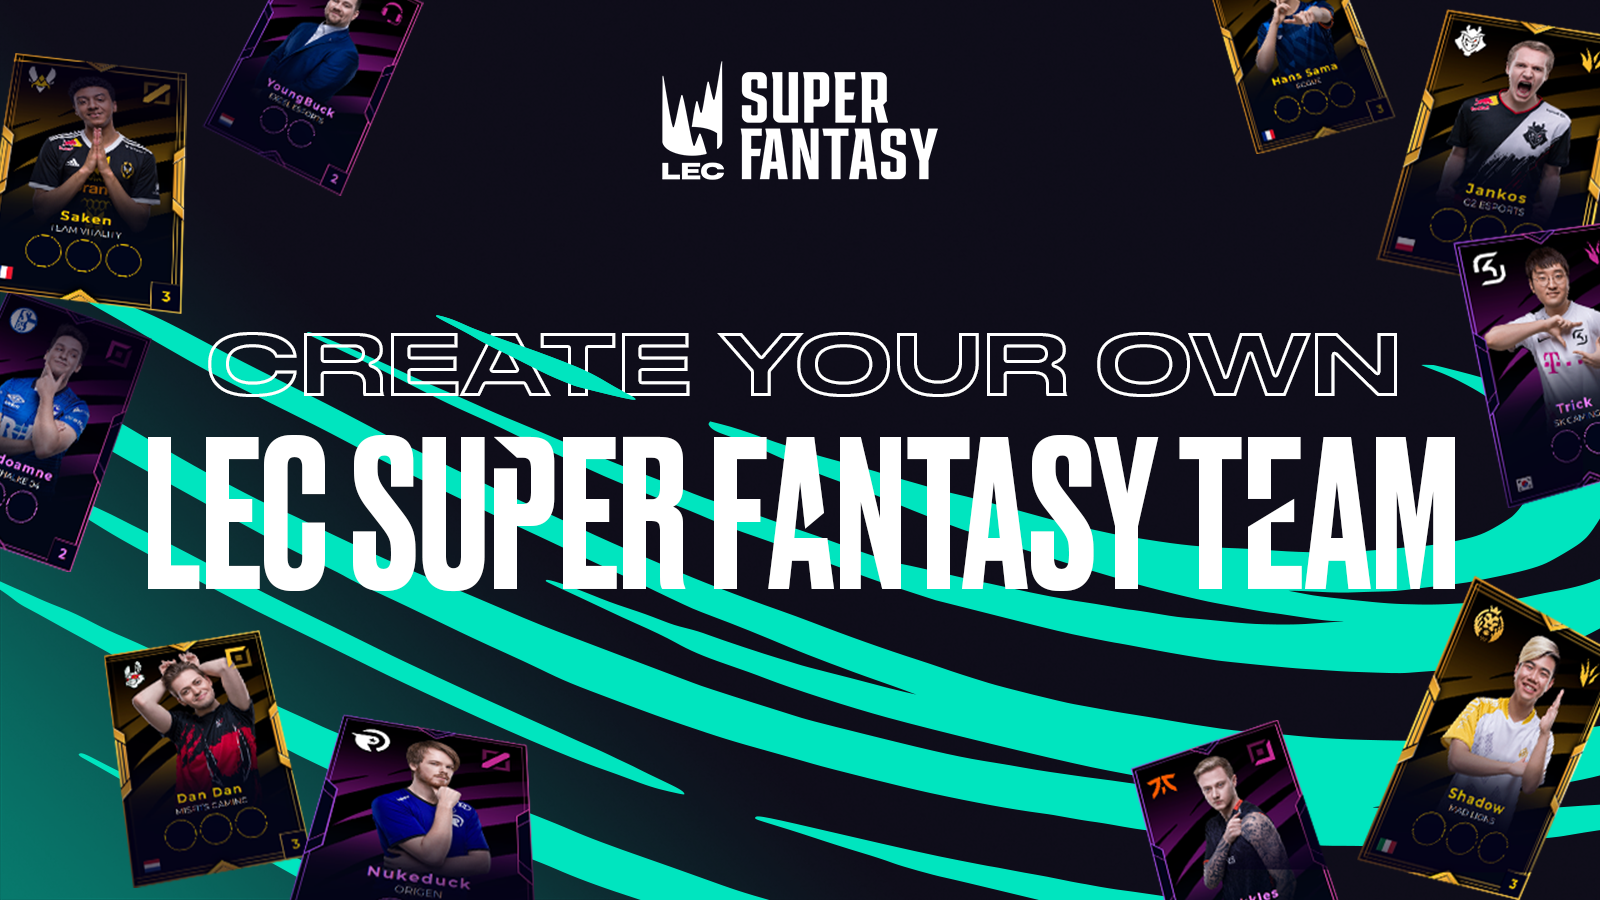 It S Time To Draft Your Dream League Team With Lec Superfantasy Esports Royalbeats In - btr x large donation roblox